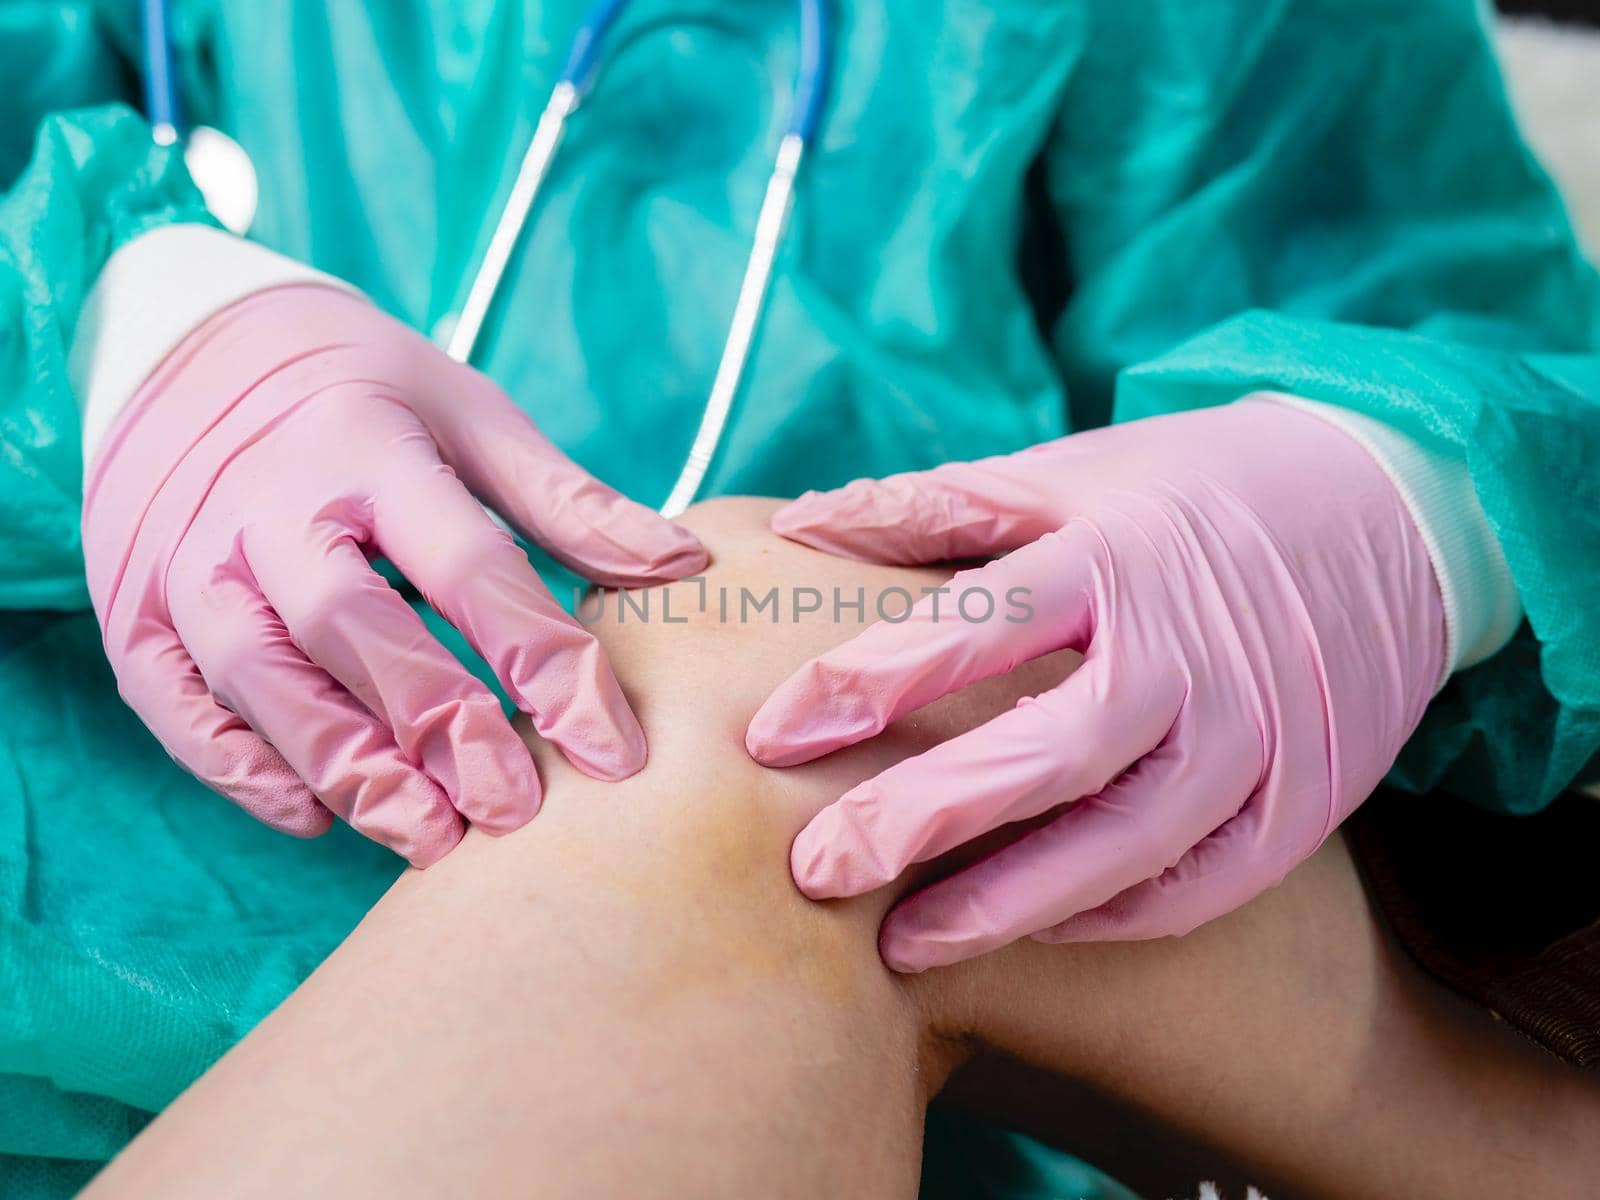 A doctor wearing medical gloves examines the bruise on the inside of the patient